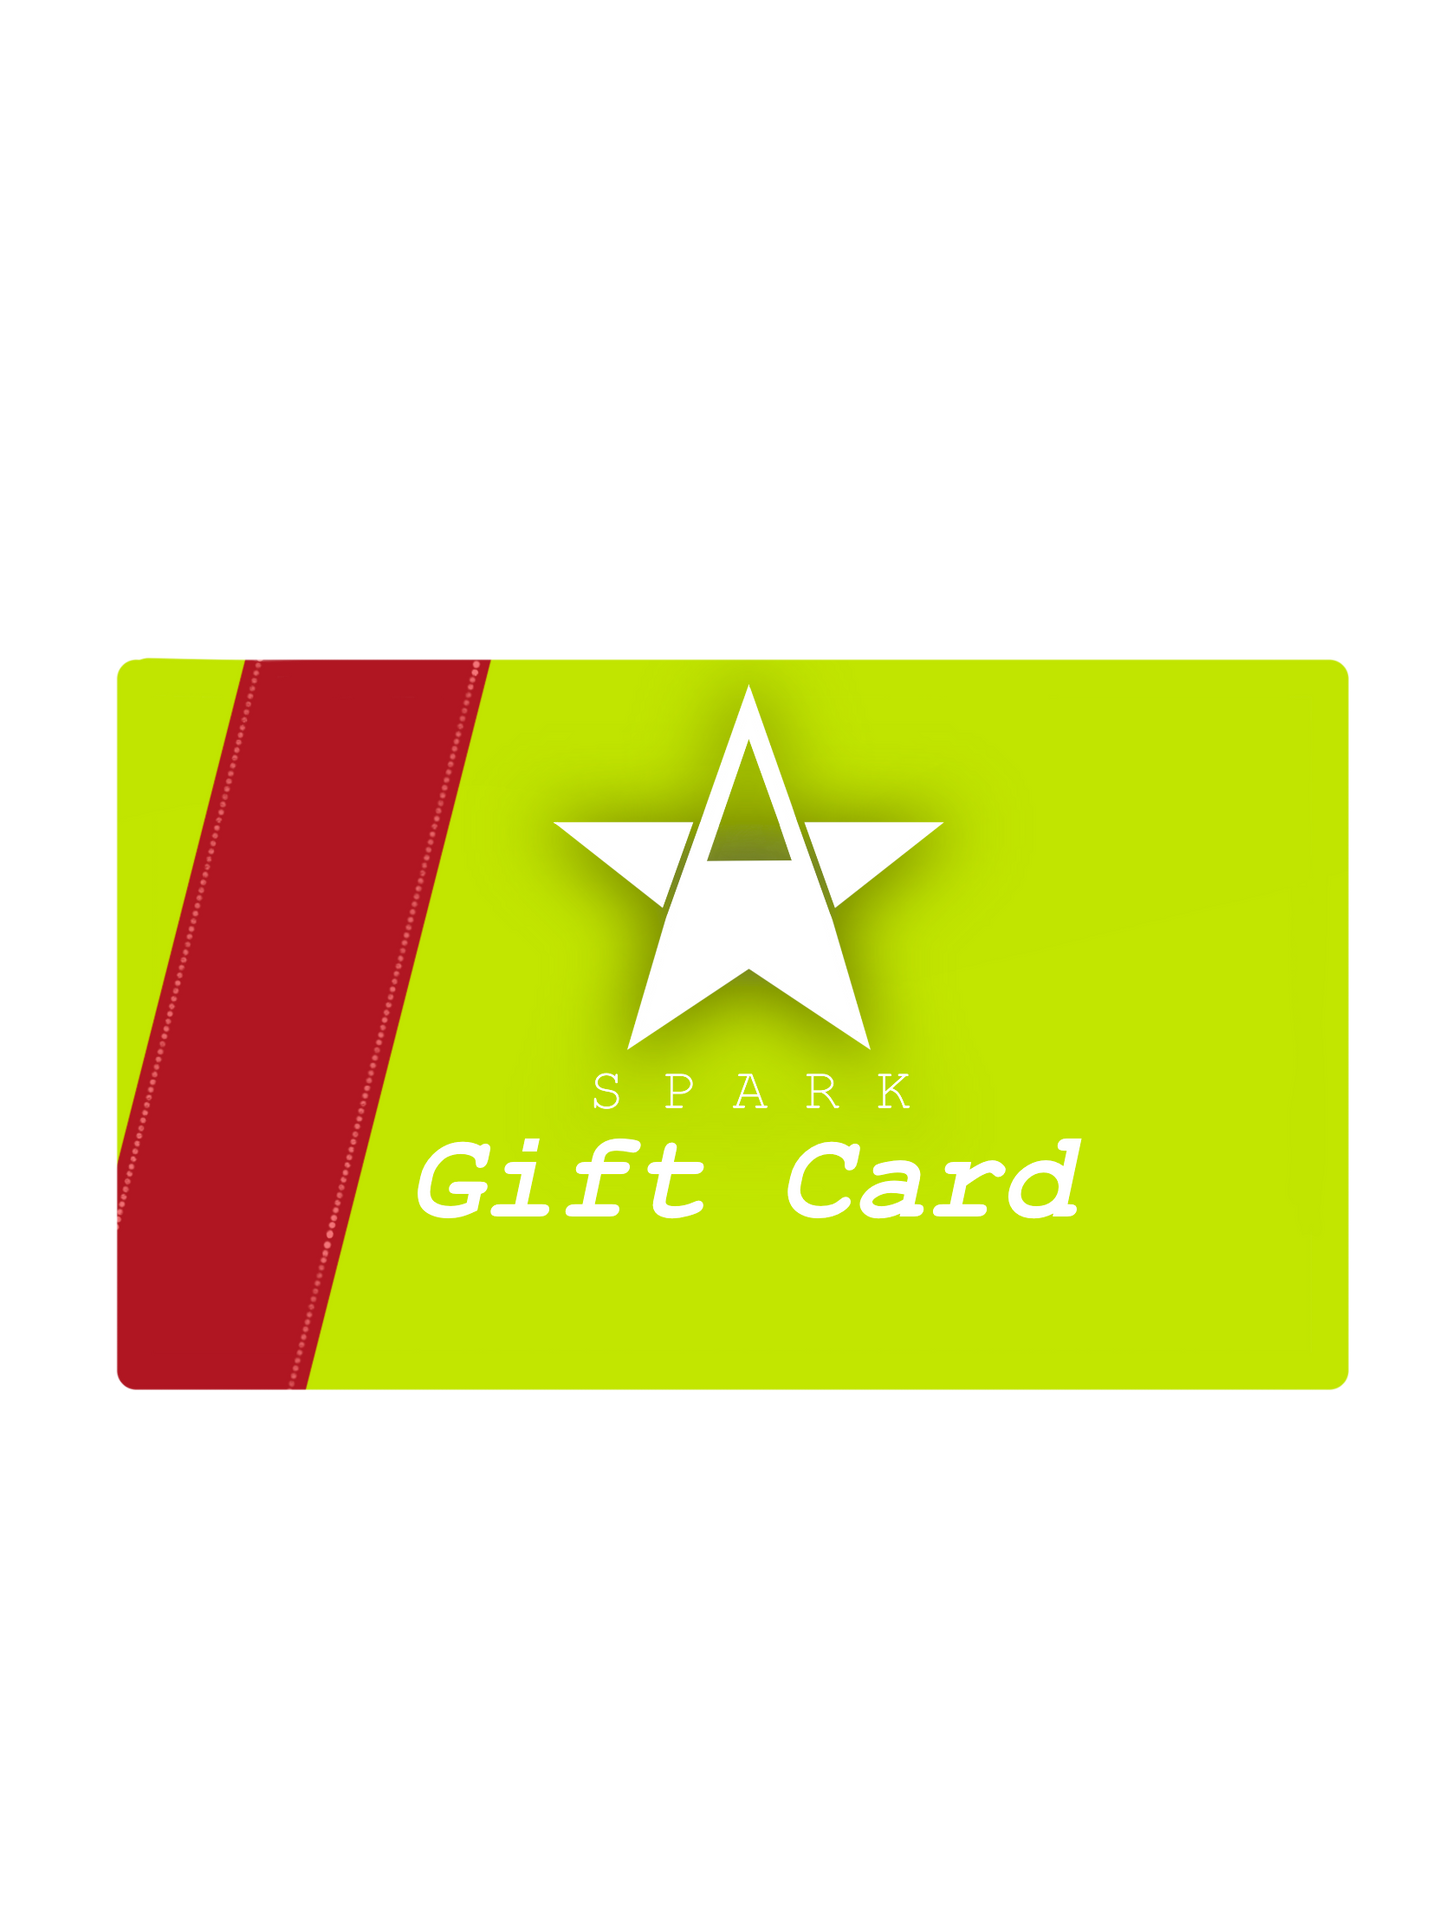 The Spark Designs Gift Card